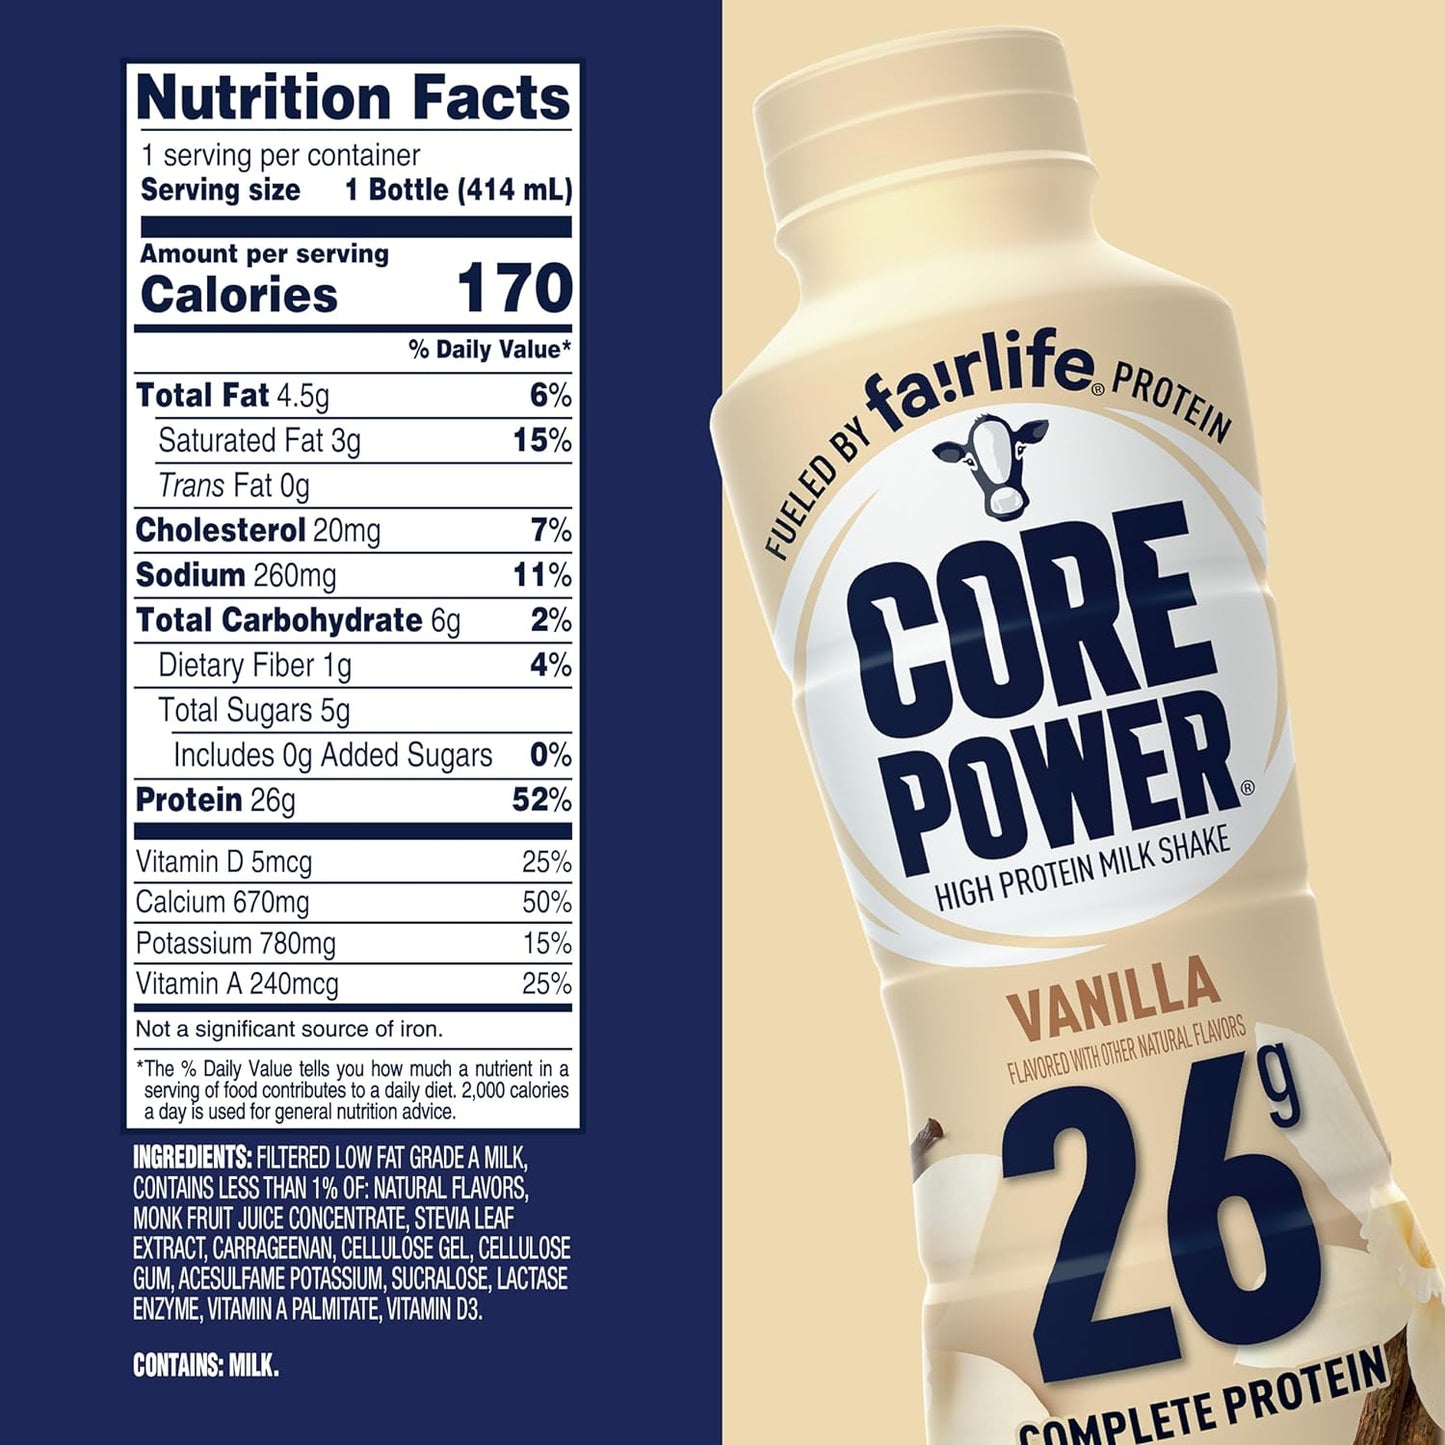 Core Power Fairlife 26g Protein Milk Shakes, Ready To Drink for Workout Recovery, Vanilla, 14 Fl Oz (Pack of 12)